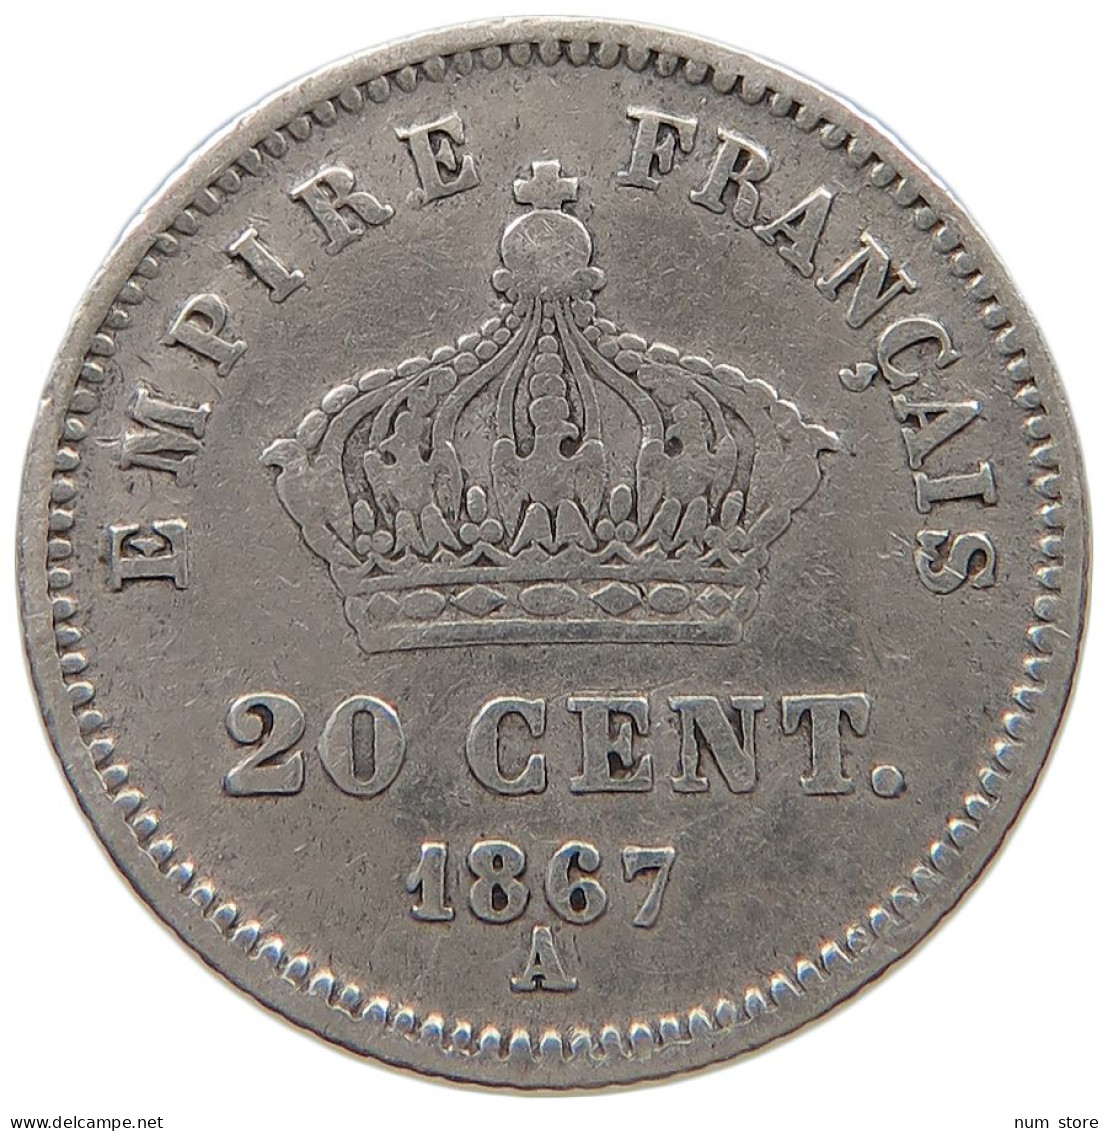 FRANCE 20 CENTIMES 1867 A Napoleon III. (1852-1870) #a044 0981 - 20 Centimes